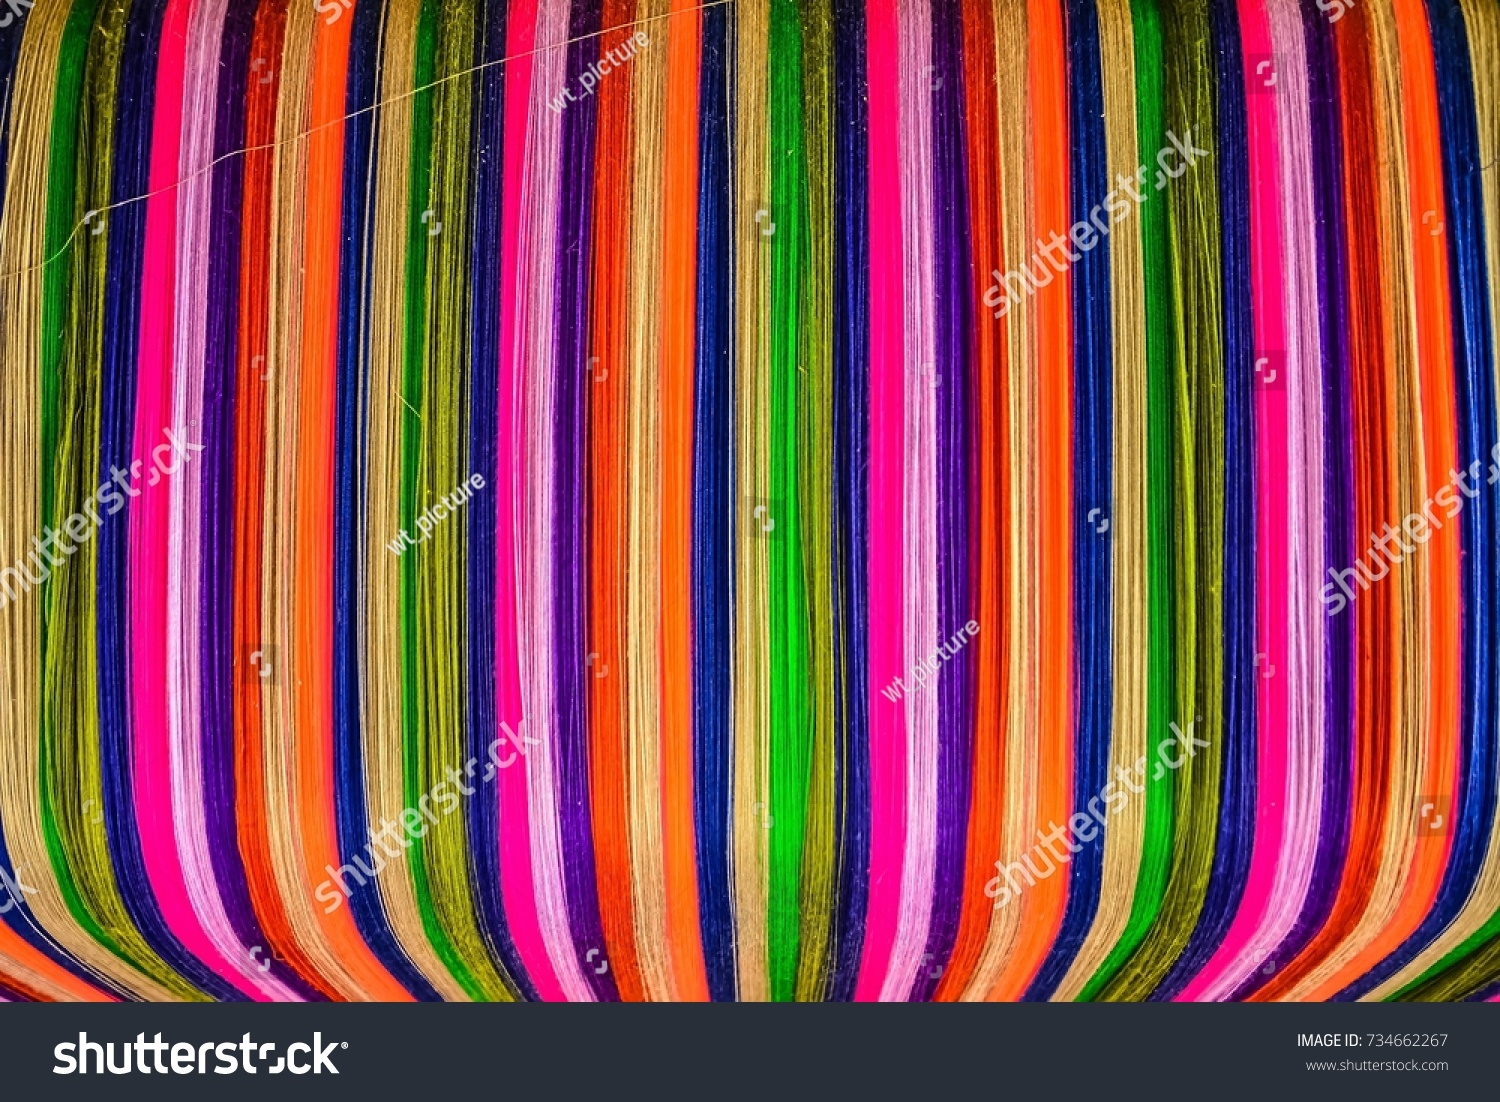 Thai silk colorful,colorful pattern,colorful background,colorful texture. #734662267